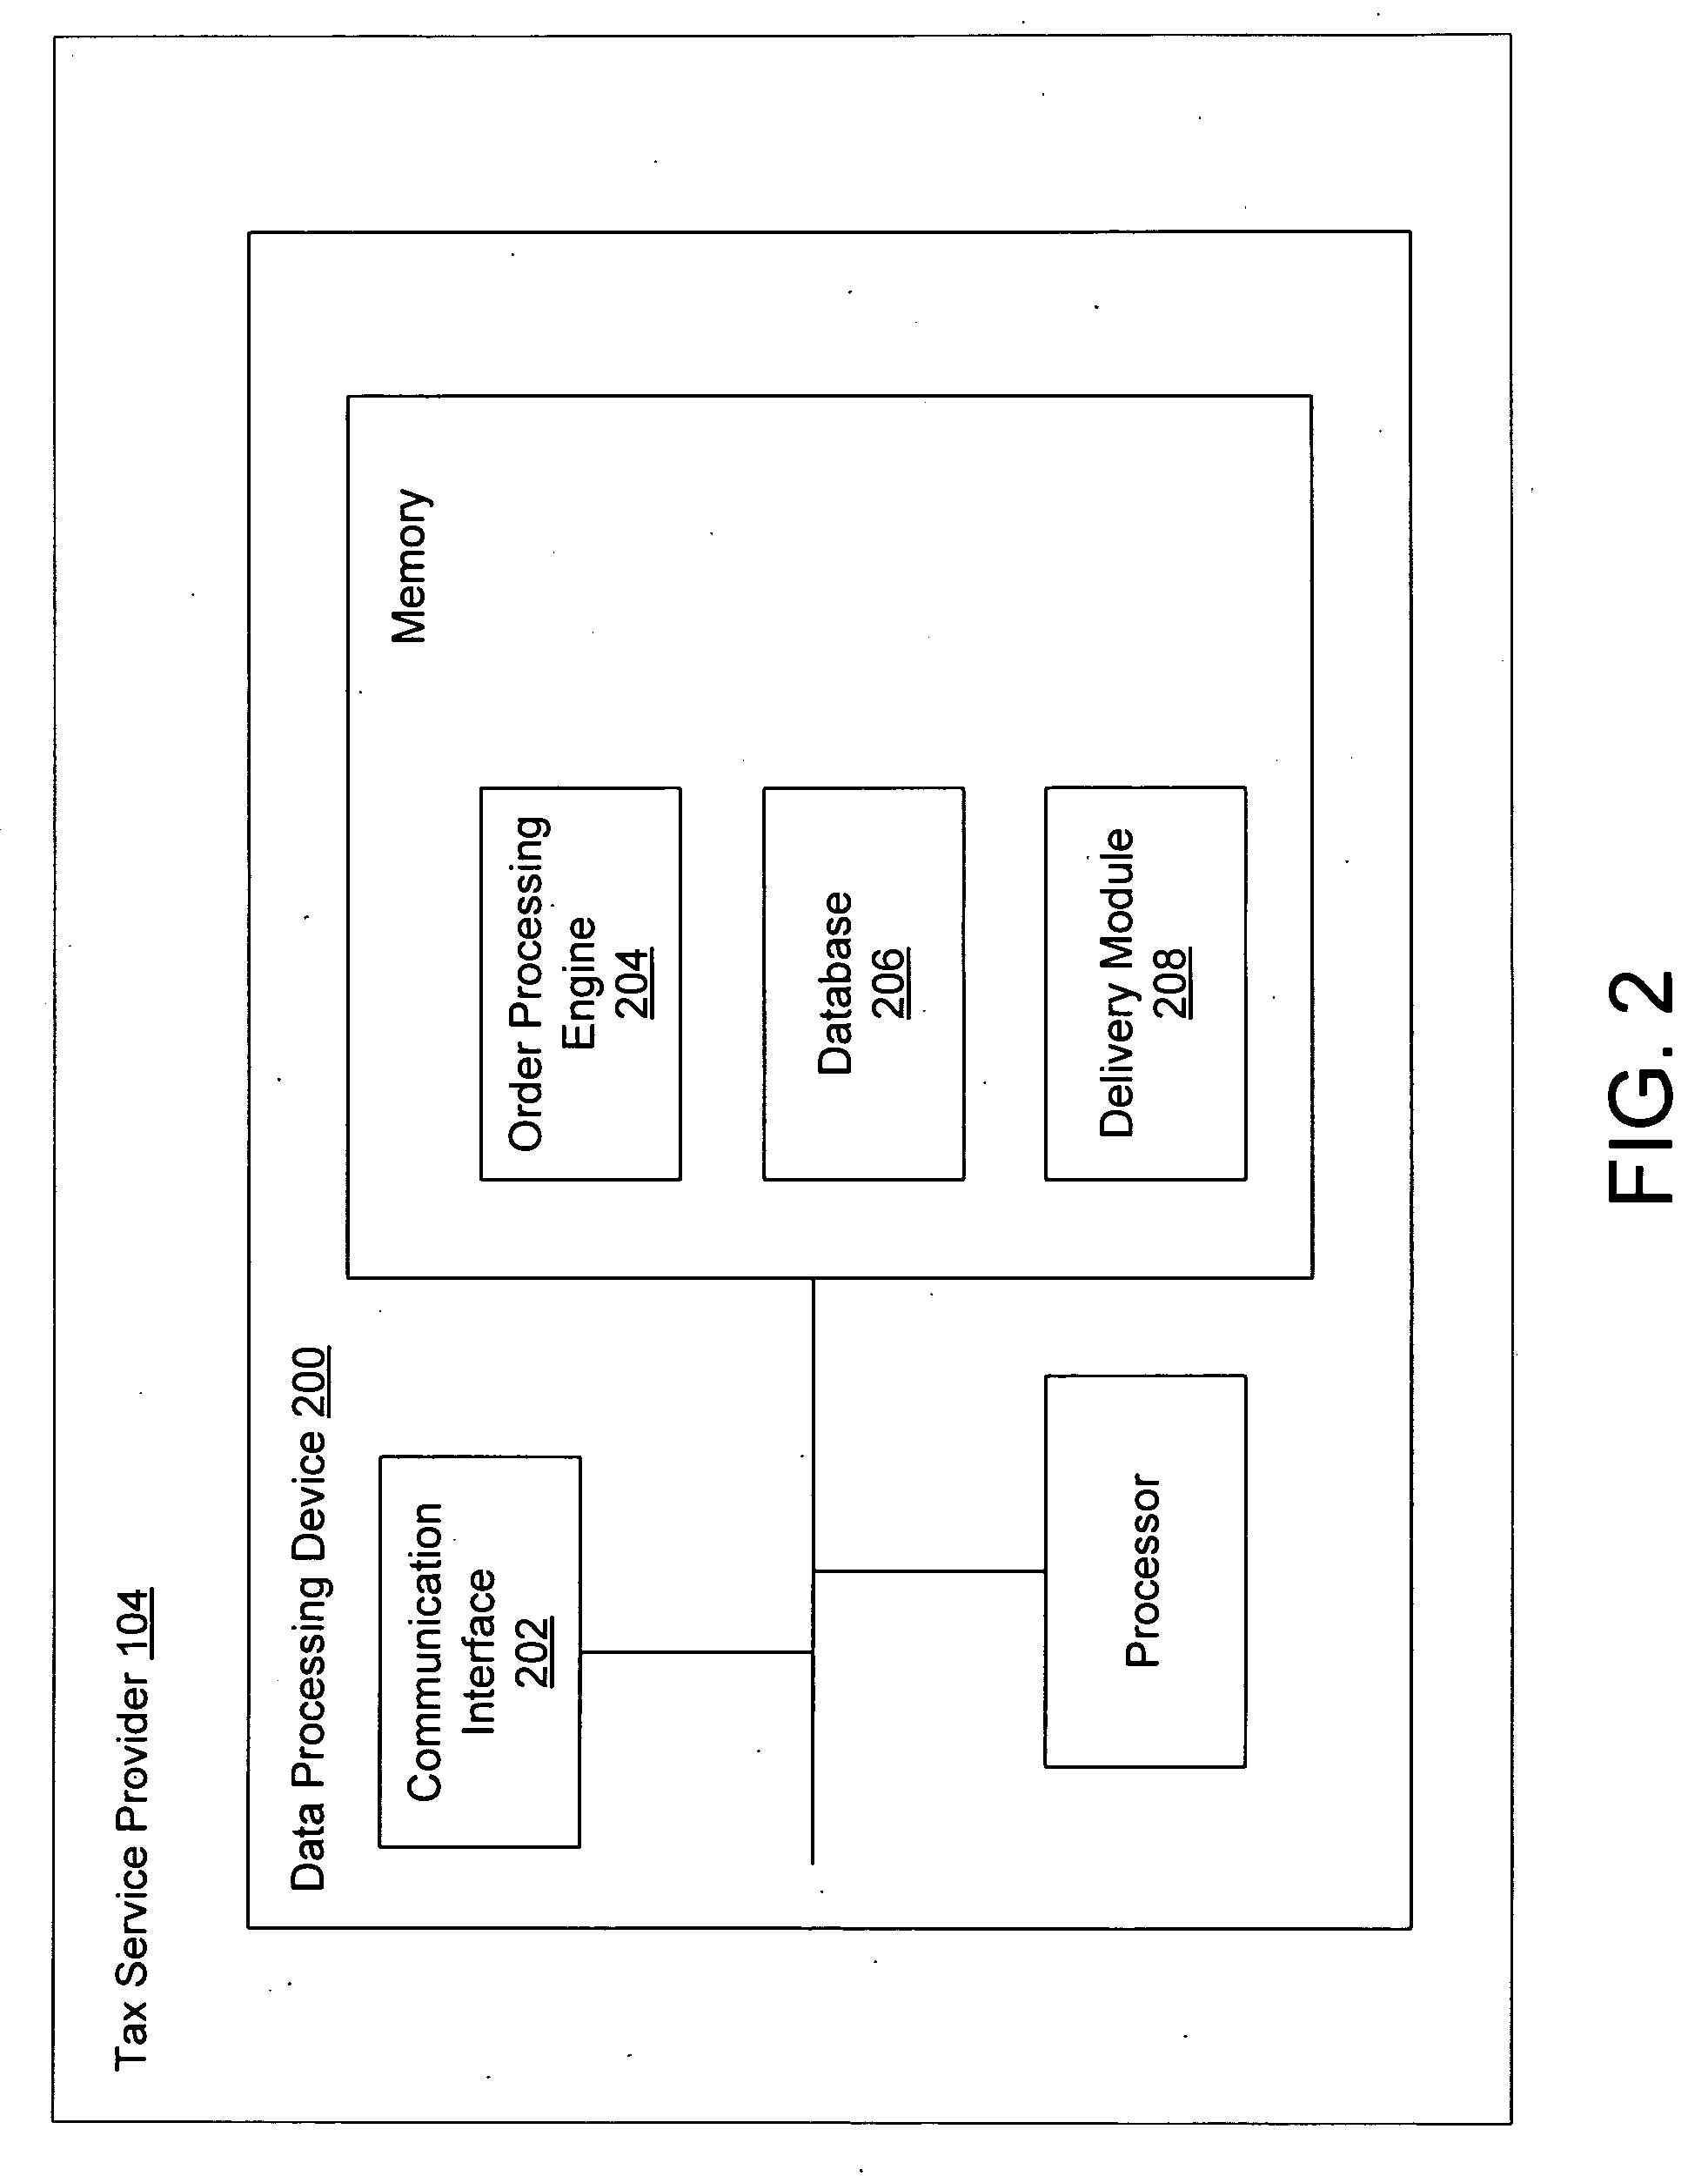 System and method for recreating tax documents